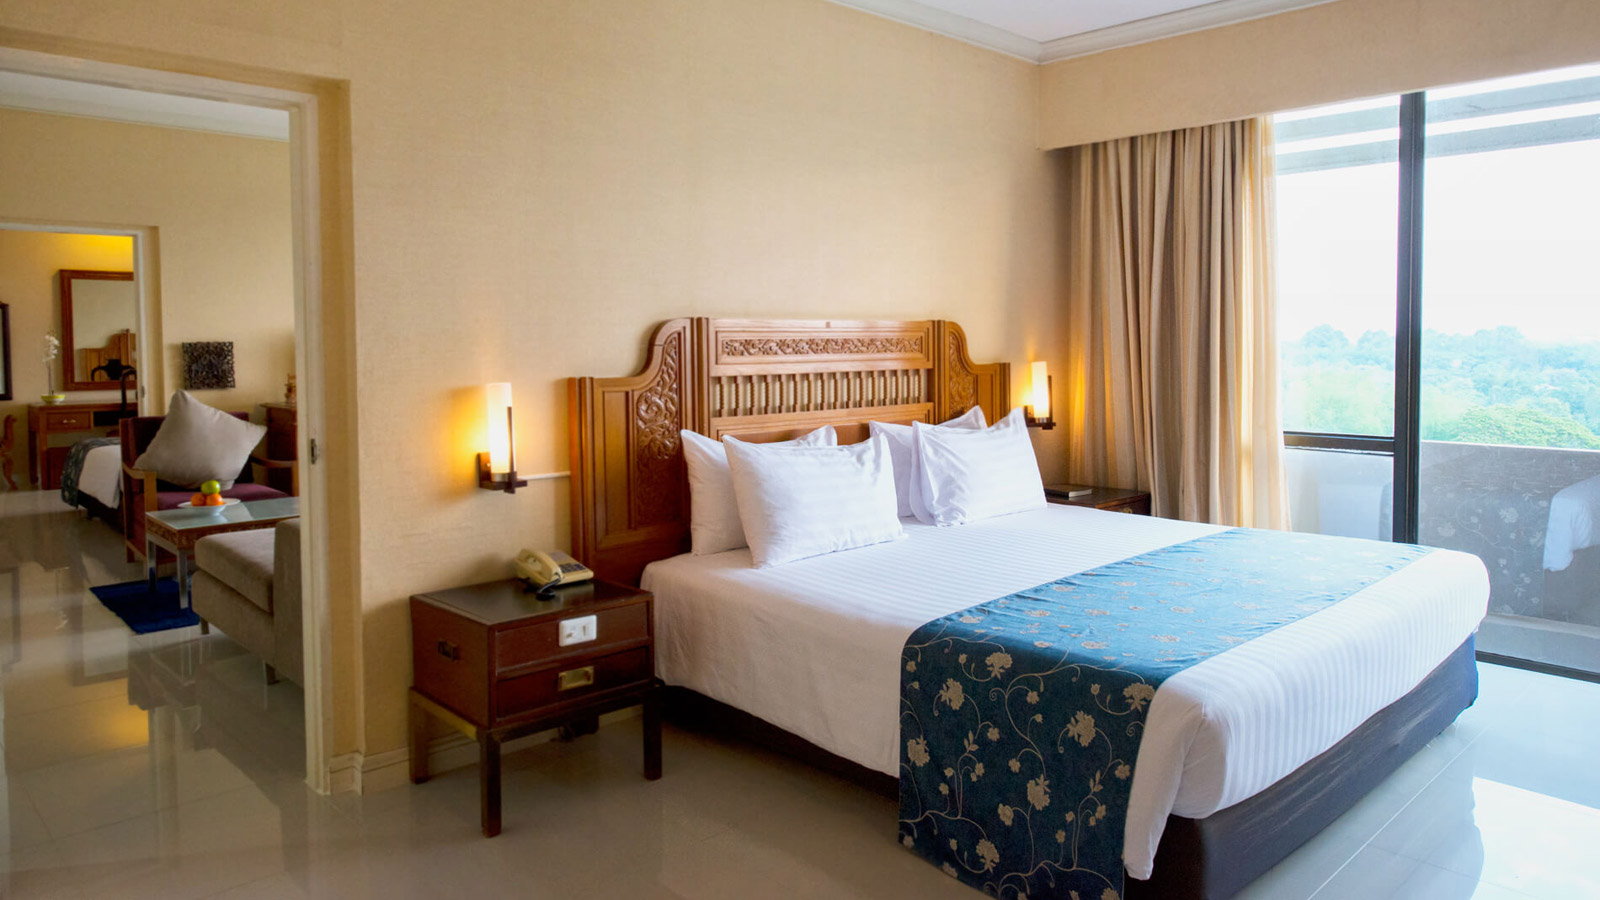 Two Bedroom Suites at Loei Palace Hotel